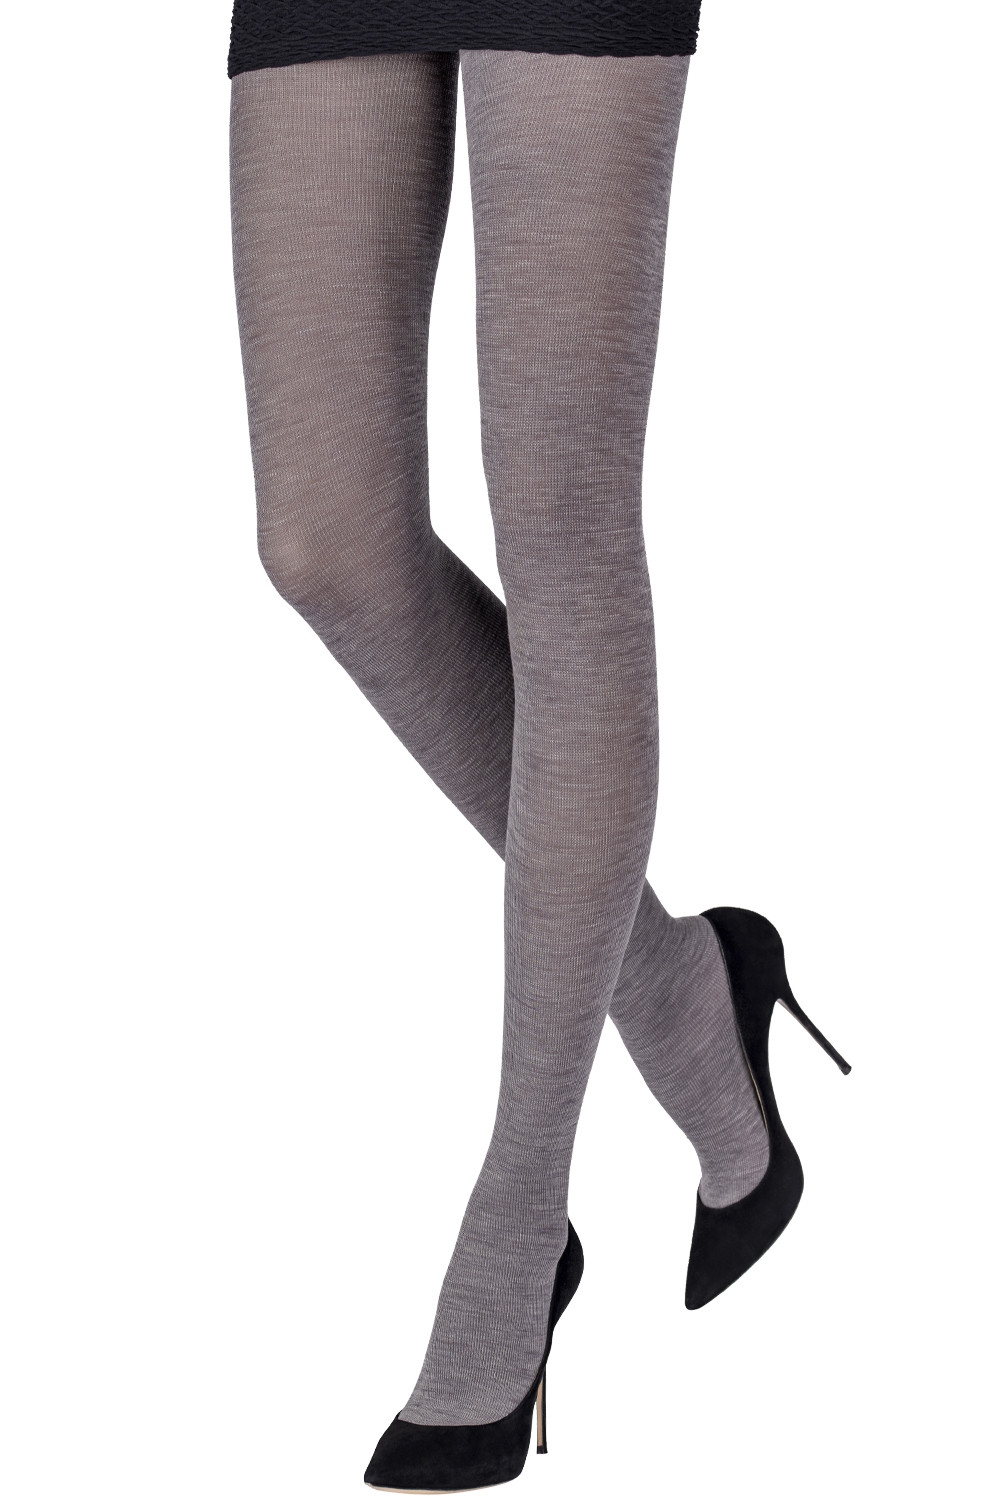 Martini Wool Tights - Hattie and the Wolf